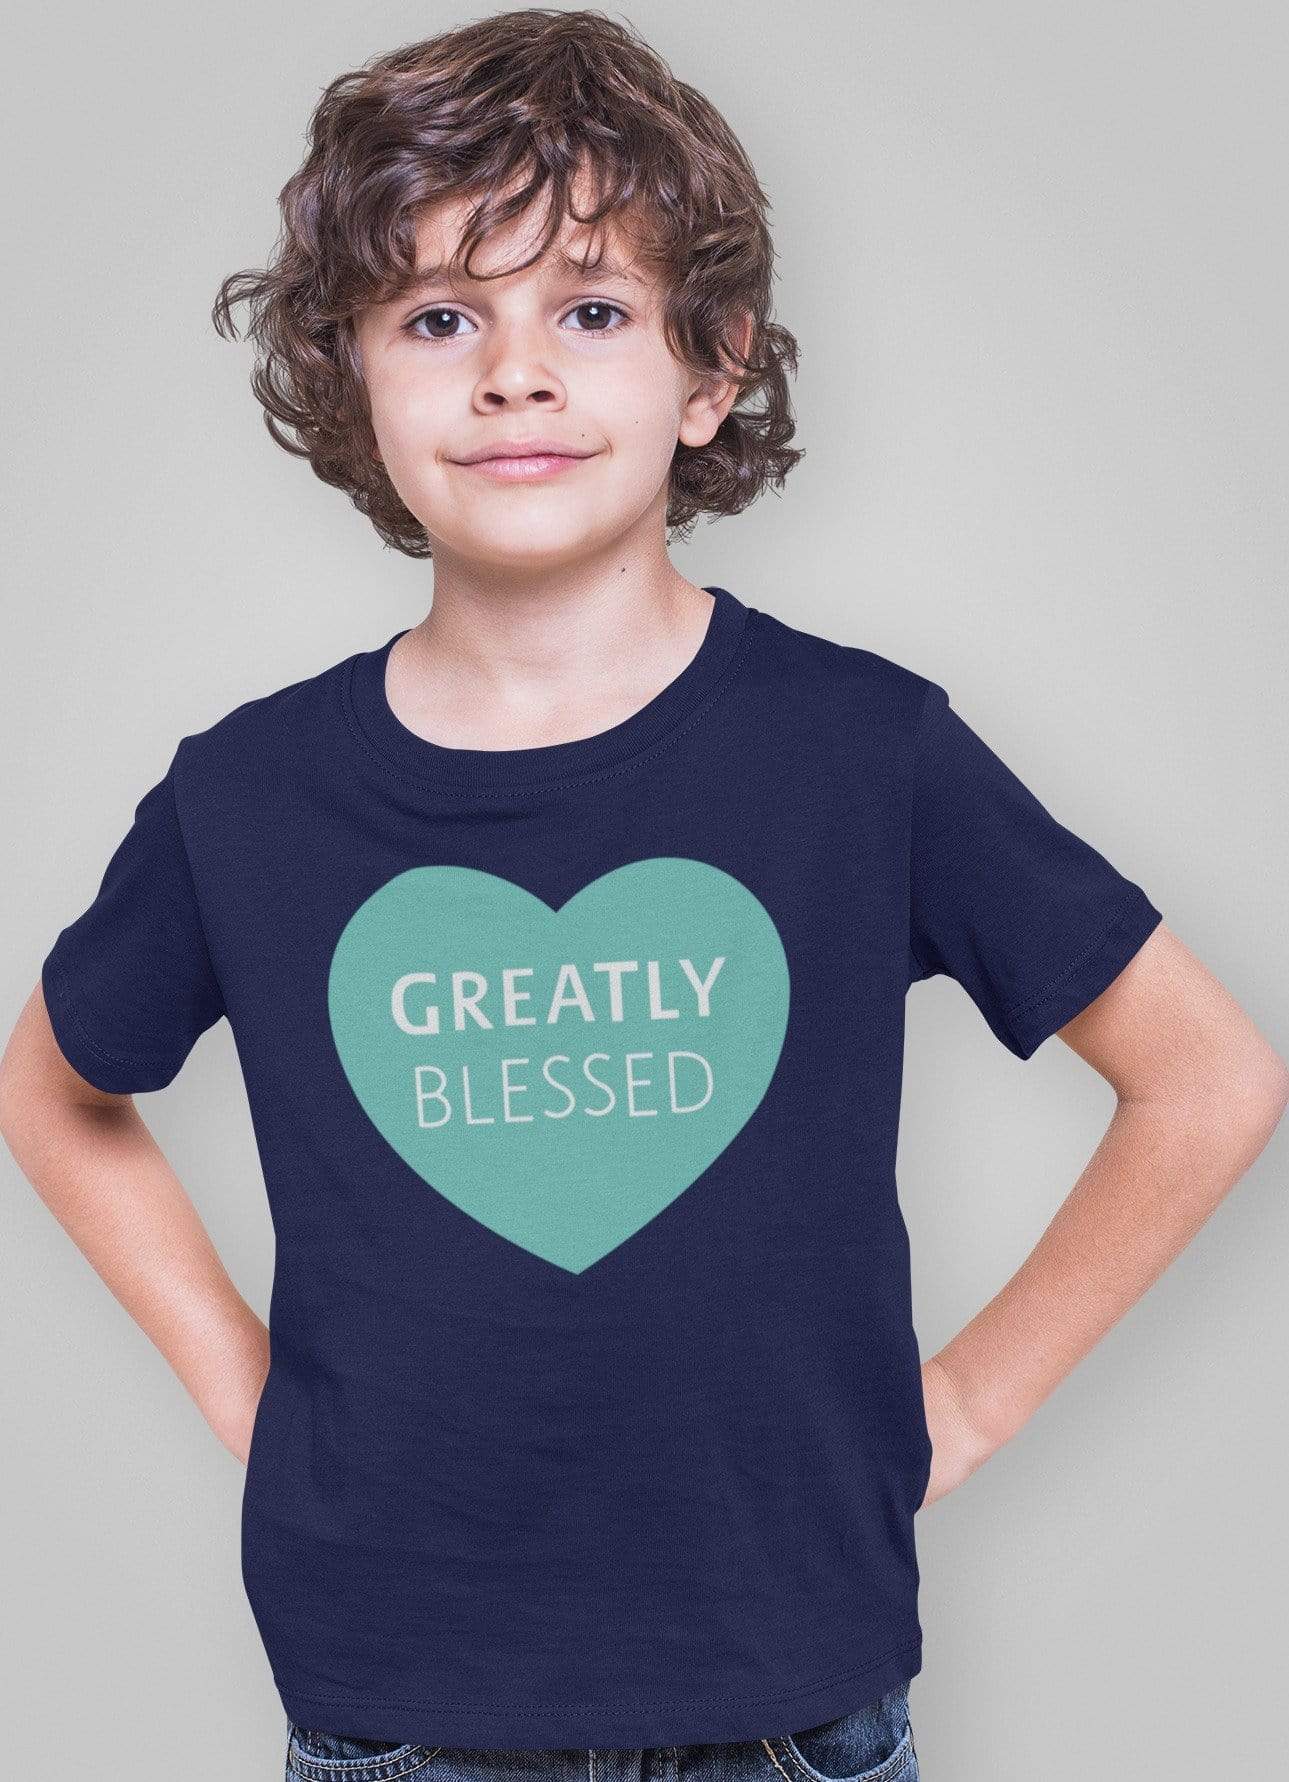 Living Words Boy Round neck Tshirt 0-11M / Navy Blue Greatly Blessed